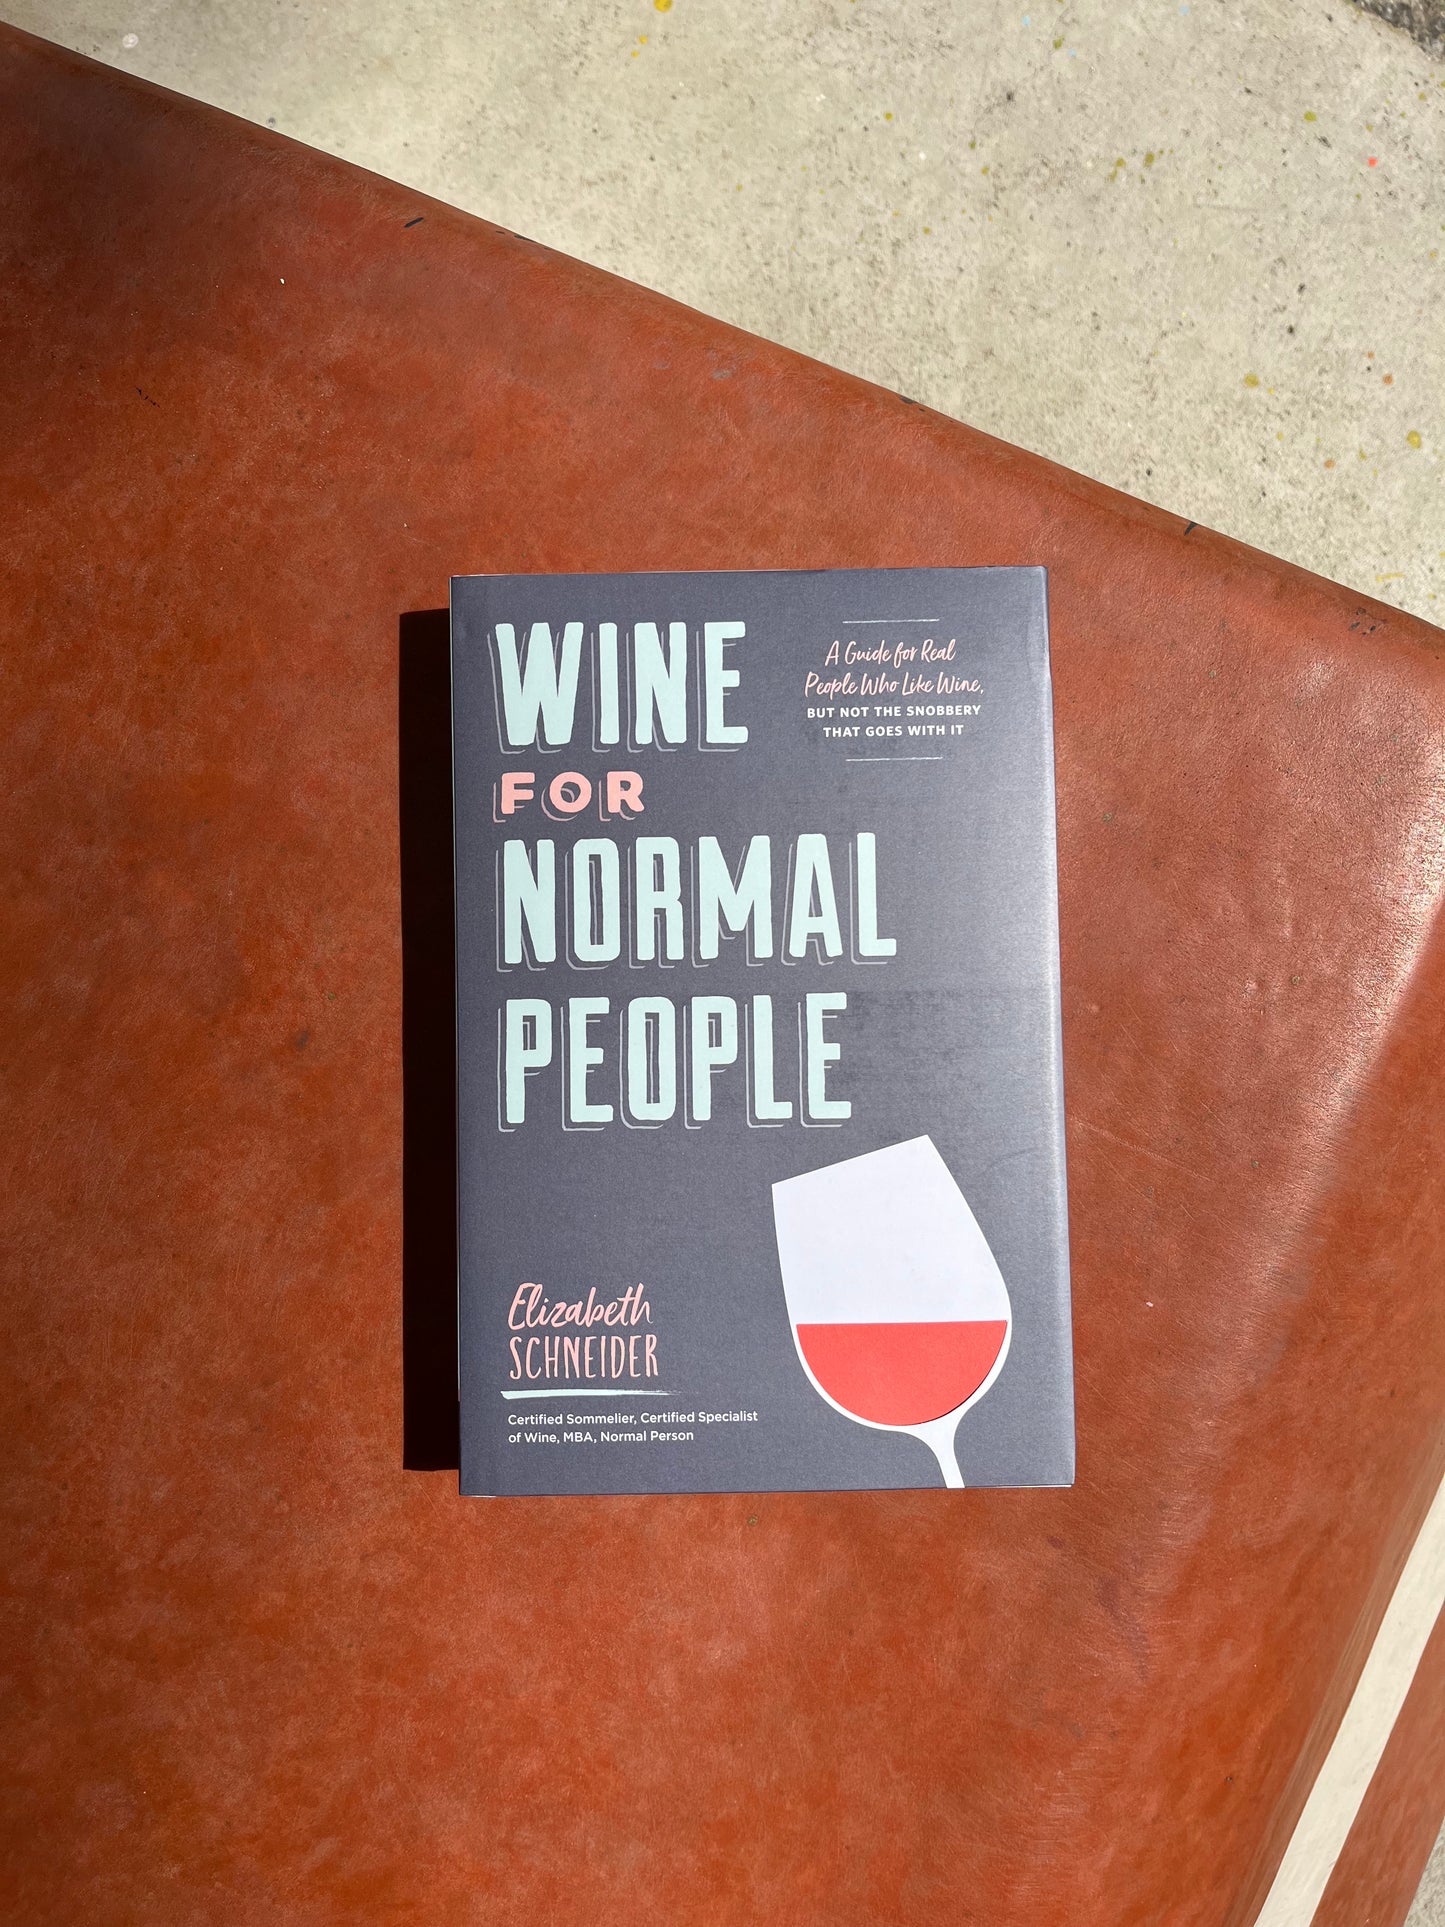 Wine for Normal People: A Guide for Real People Who Like Wine, but Not the Snobbery That Goes with It